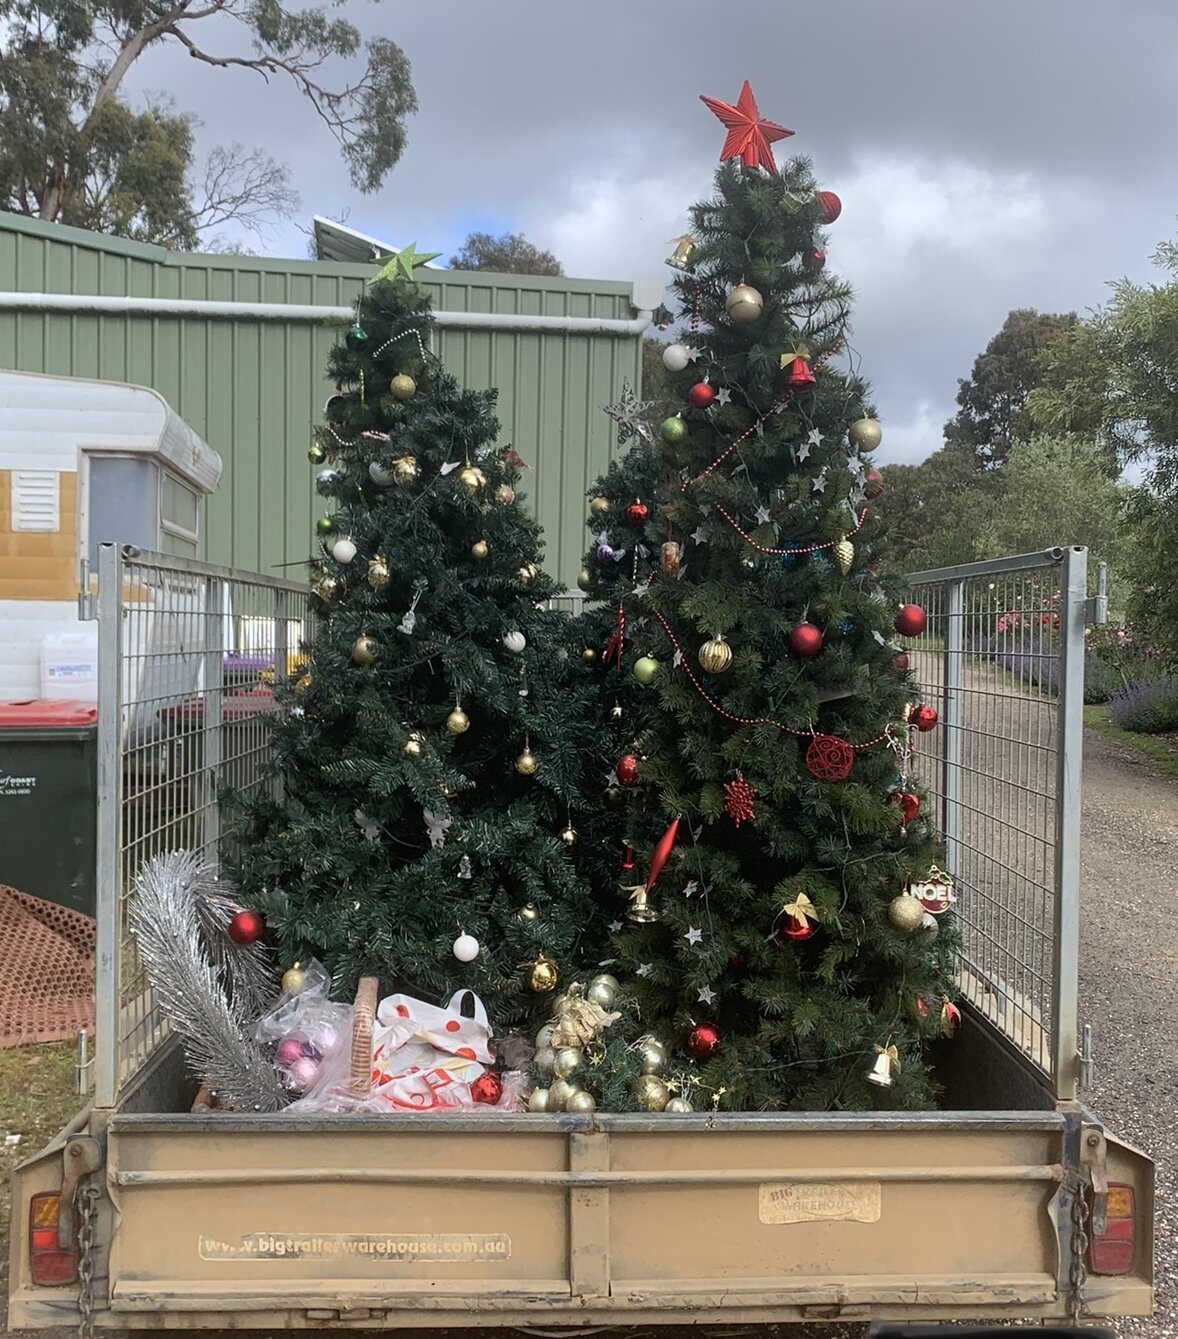 The trailer is all loaded up, ready to install Christmas trees in all of our properties! Is anyone else starting to feel the festive spirit? 🎄

#Christmas #torquayretreats #holidayrental #christmasdecorating